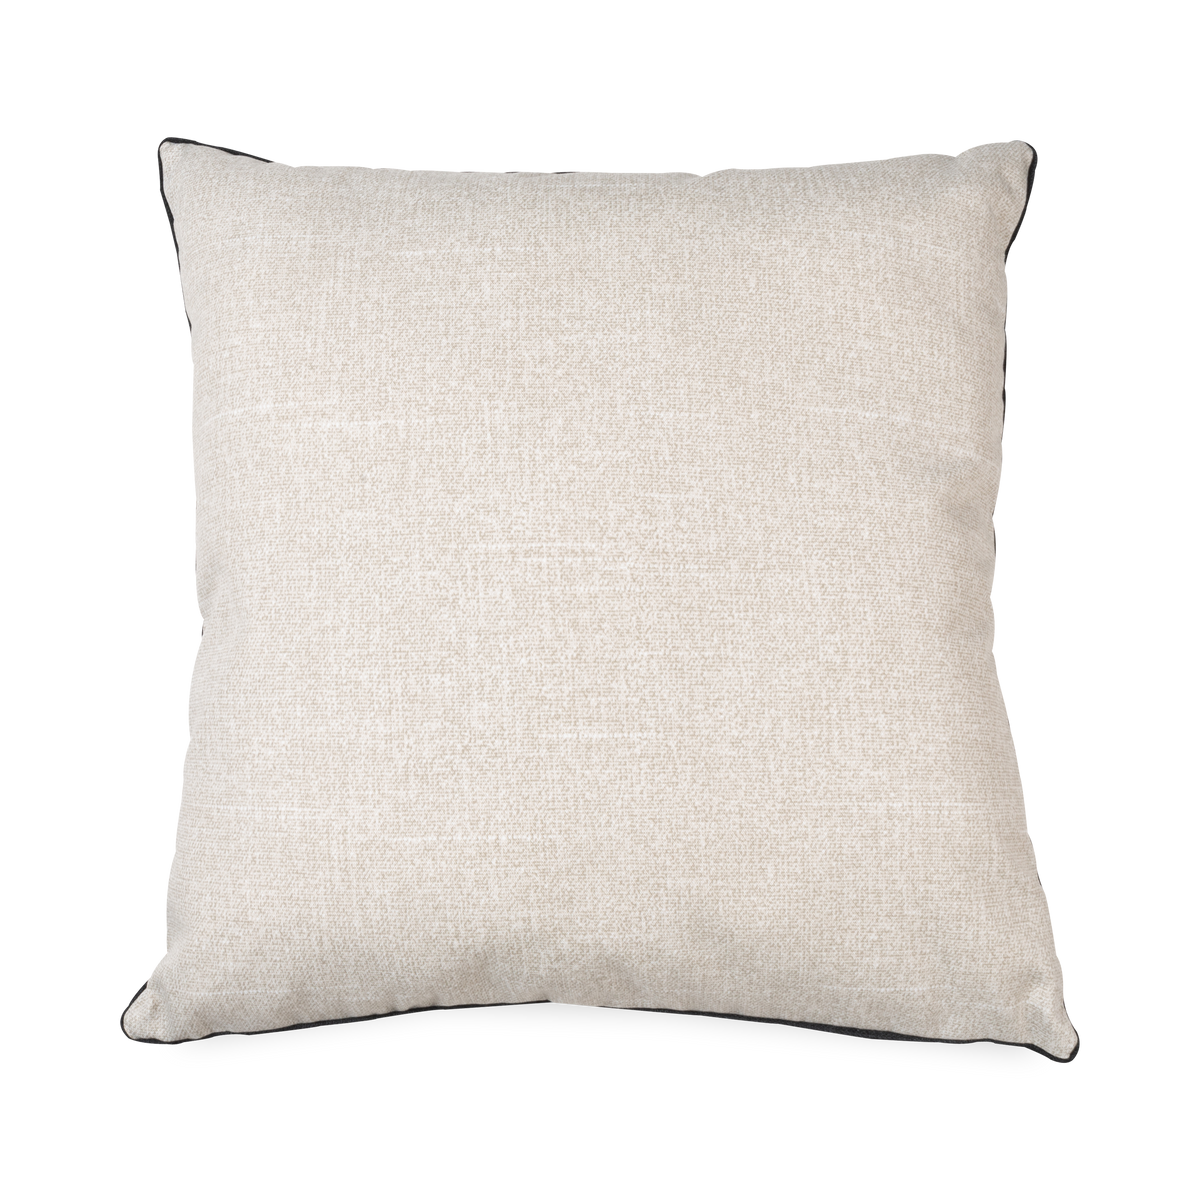 With a focus on weather performance and textural appeal, the Piping Outdoor Pillow is woven with a comfortable, weather-resistant beige fabric.